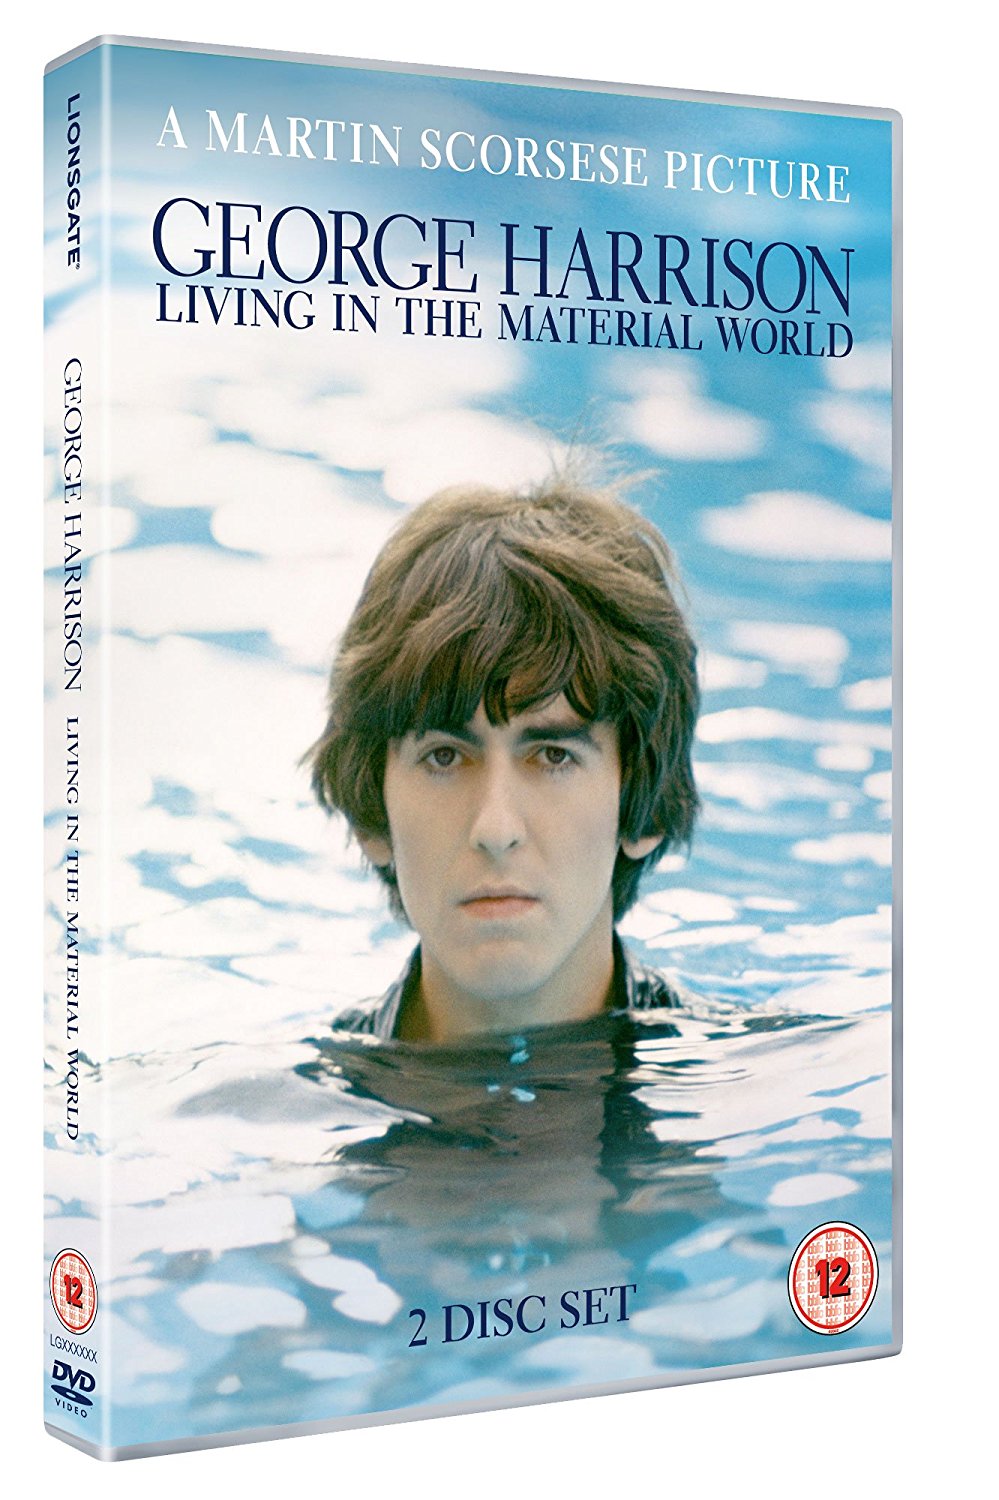 George Harrison - Living in the Material World | Martin Scorsese